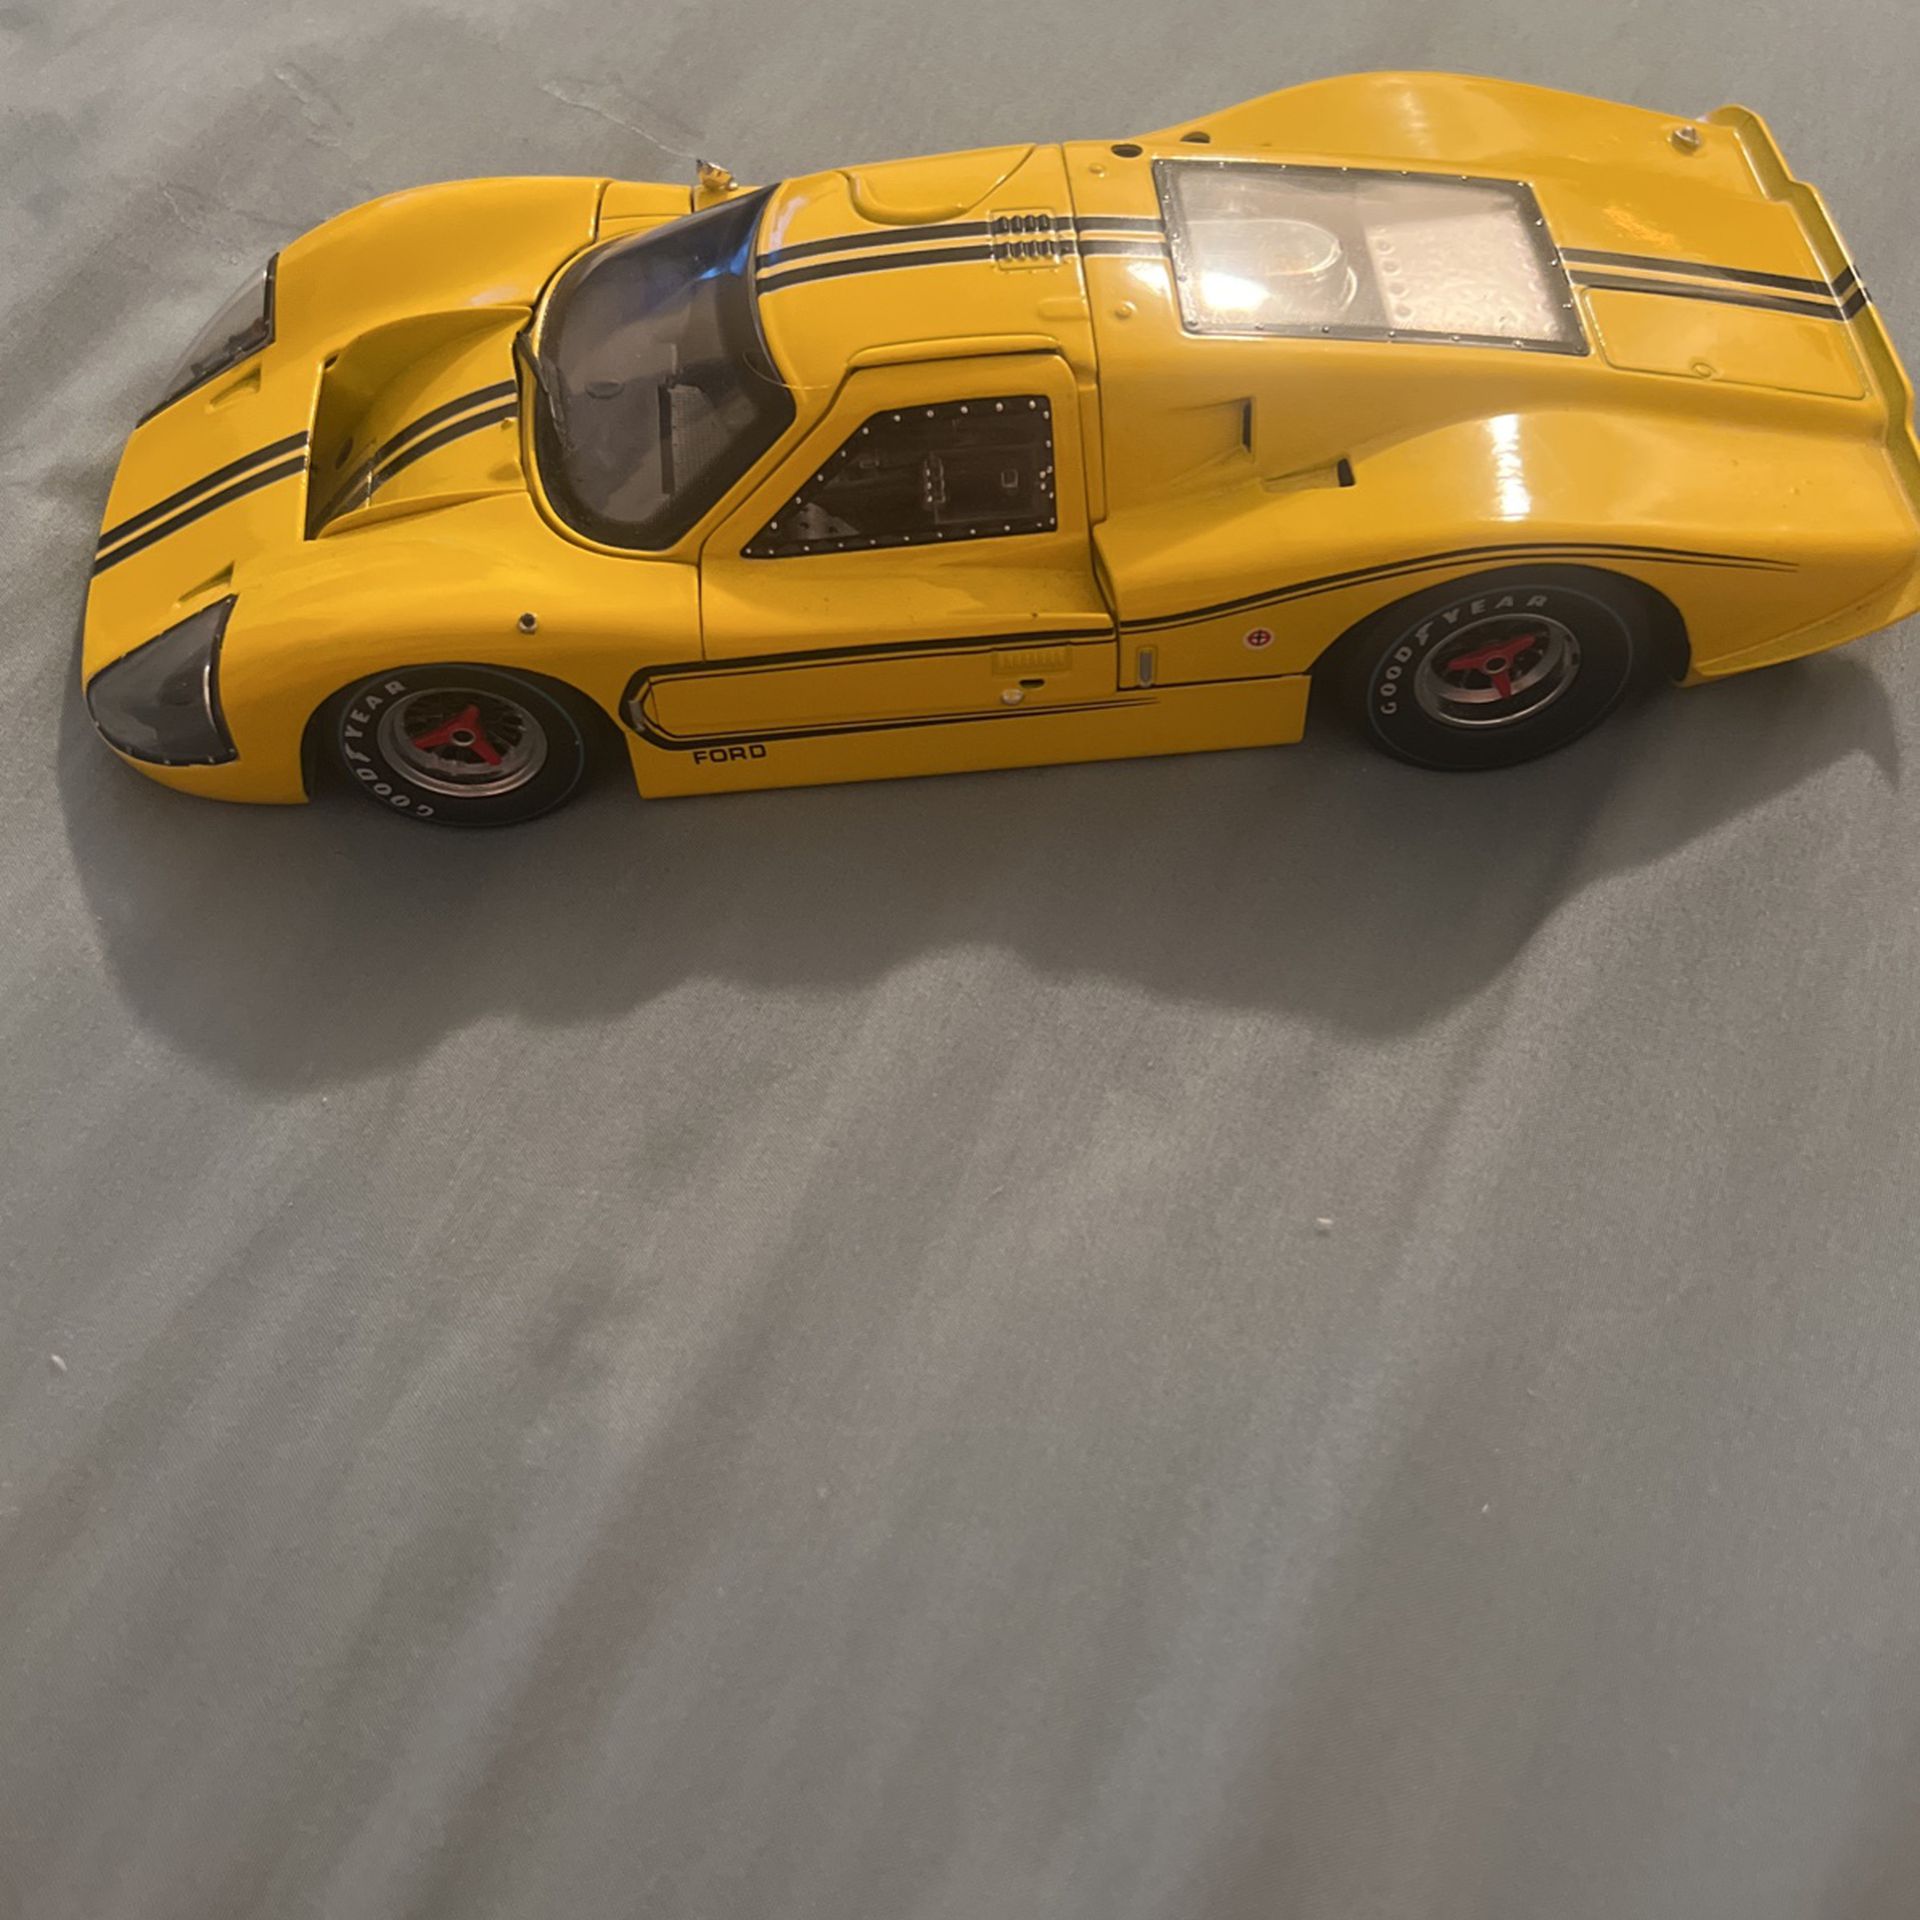 Ford MK Shelby Collectible 1967 Yellow 1:18 Diecast Car Model